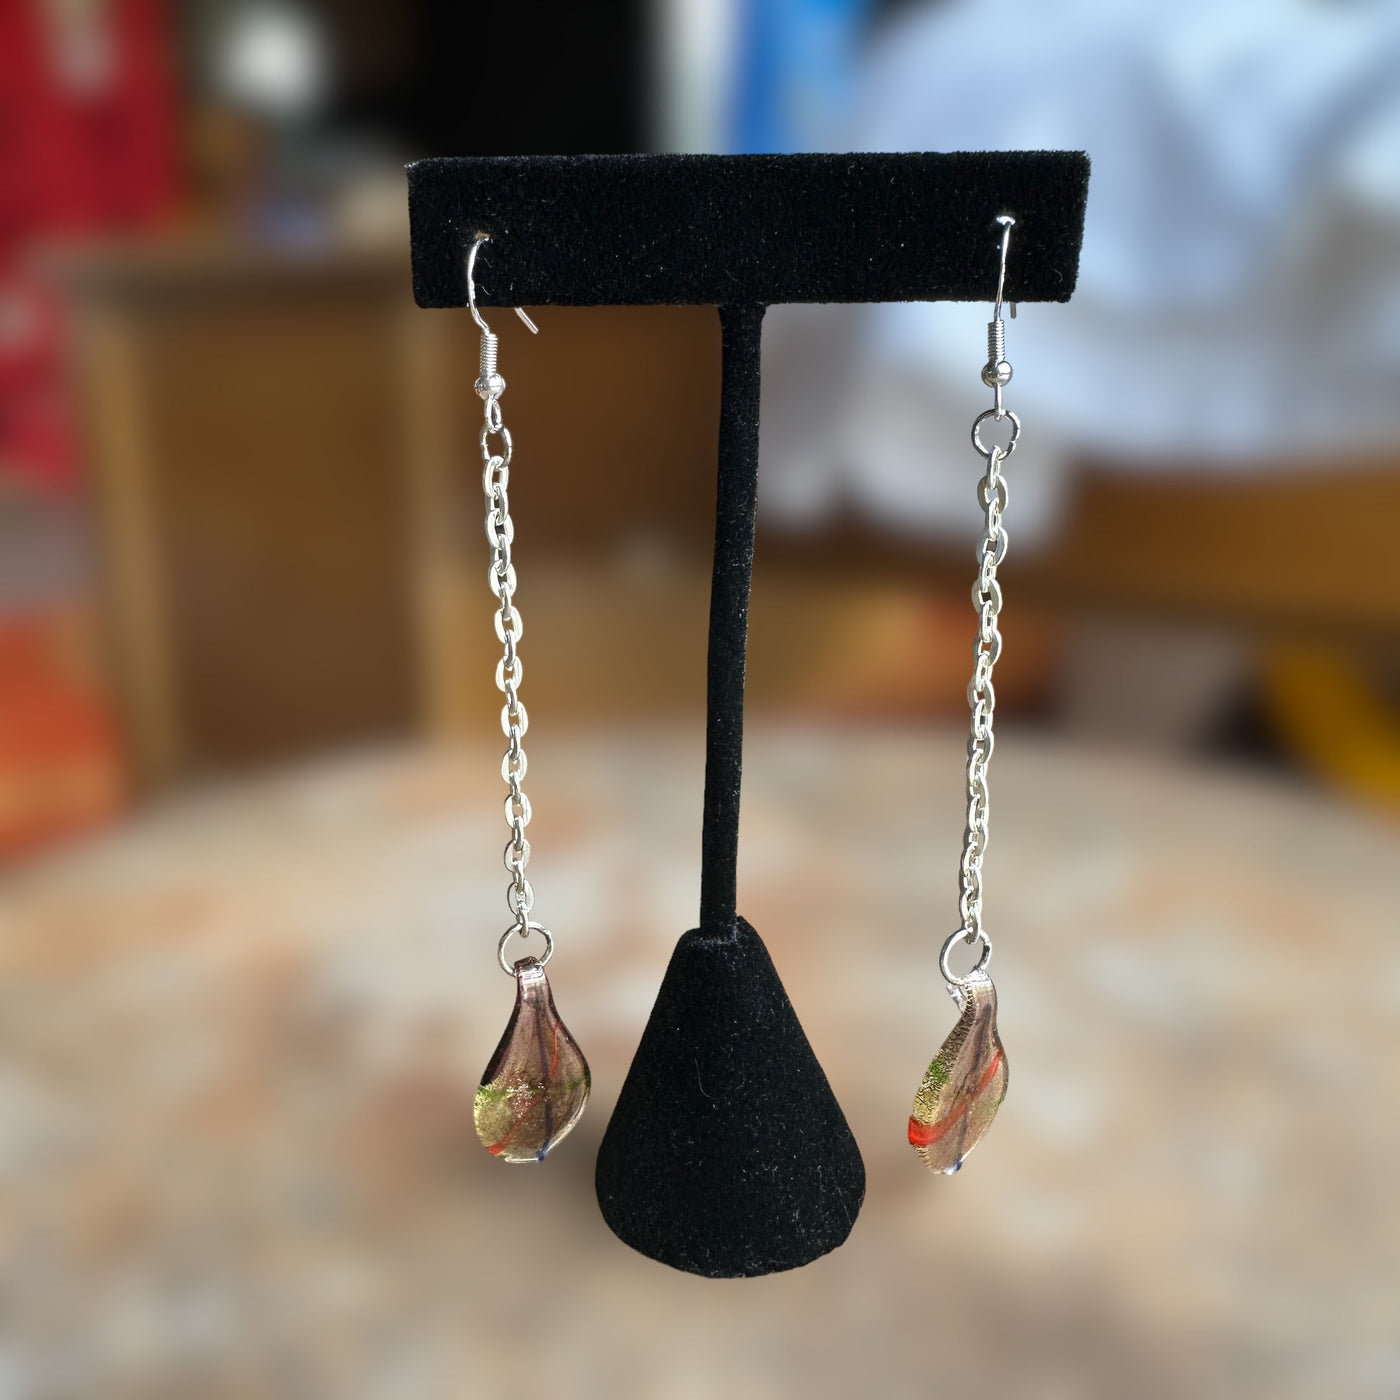 reworked glass dangle earrings with sterling silver fishhook